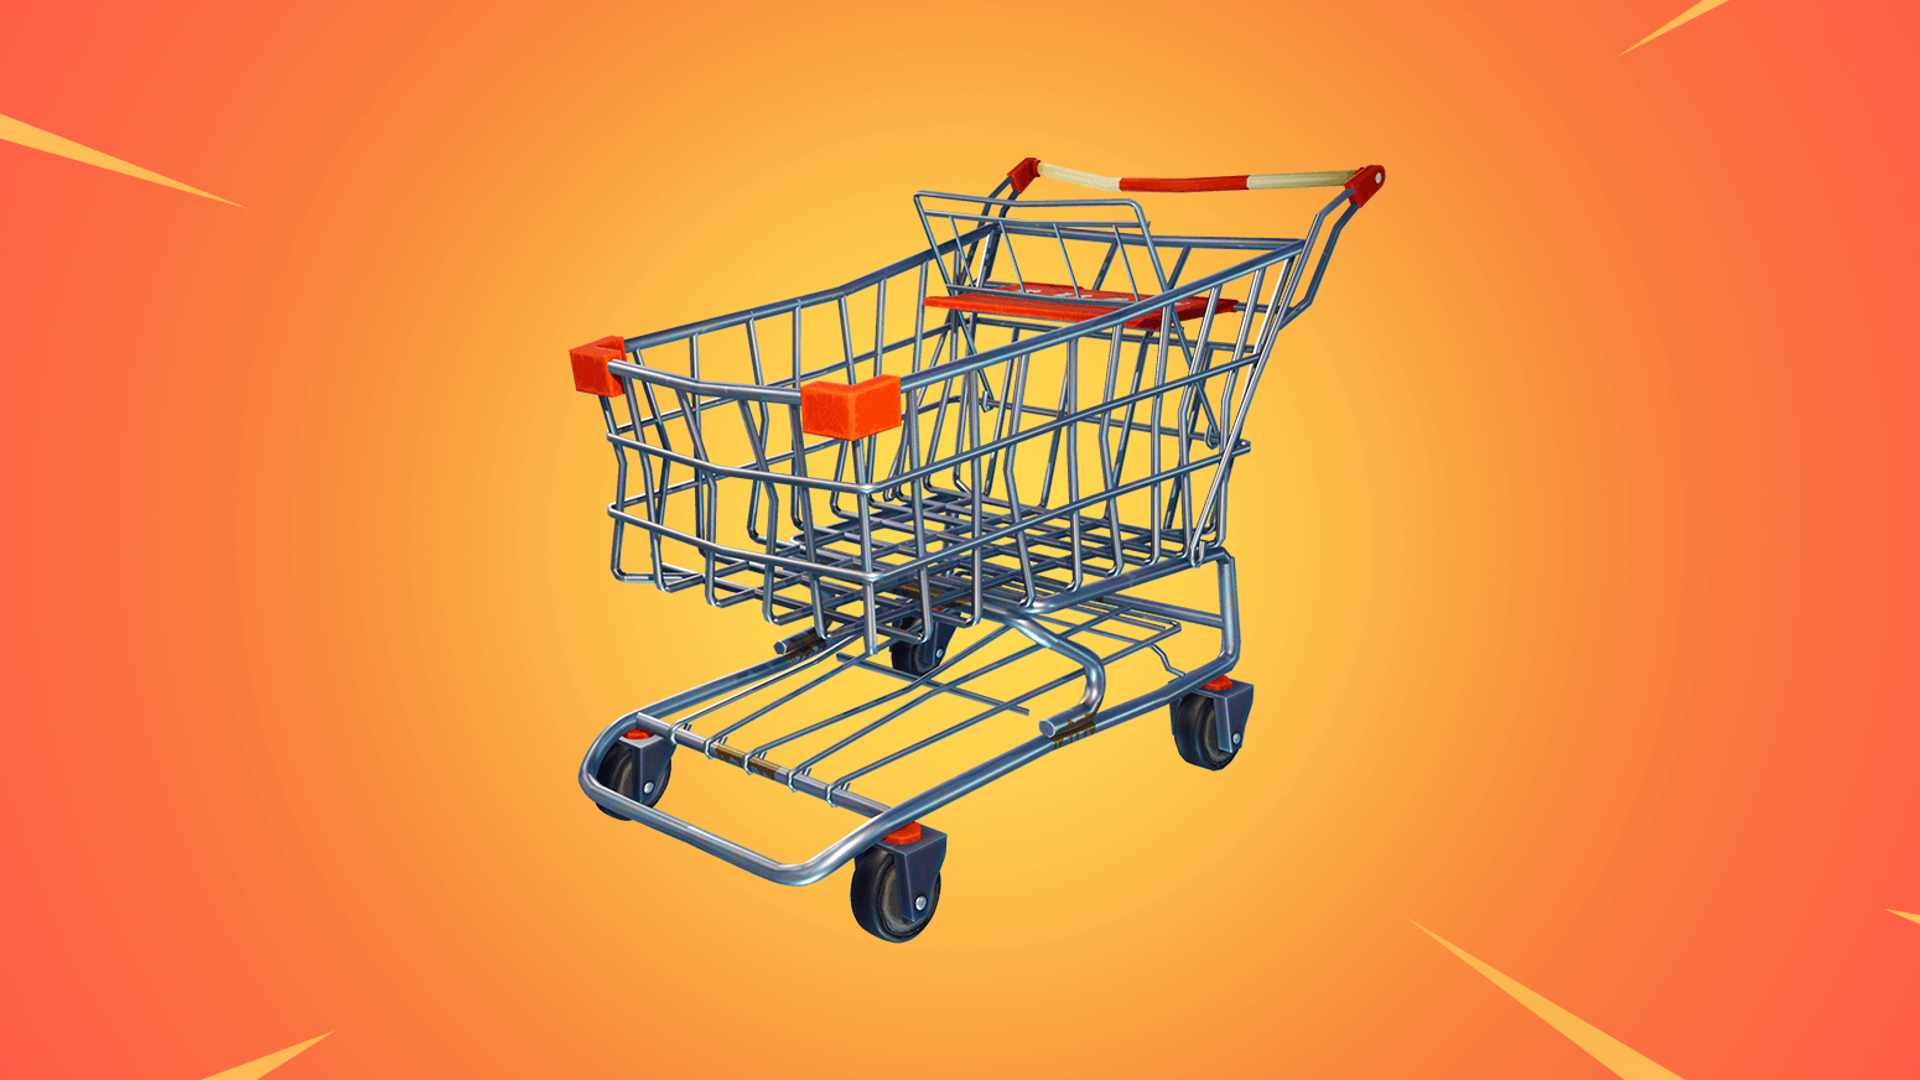 The Epic Games Store Finally Adds Shopping Cart Functionality